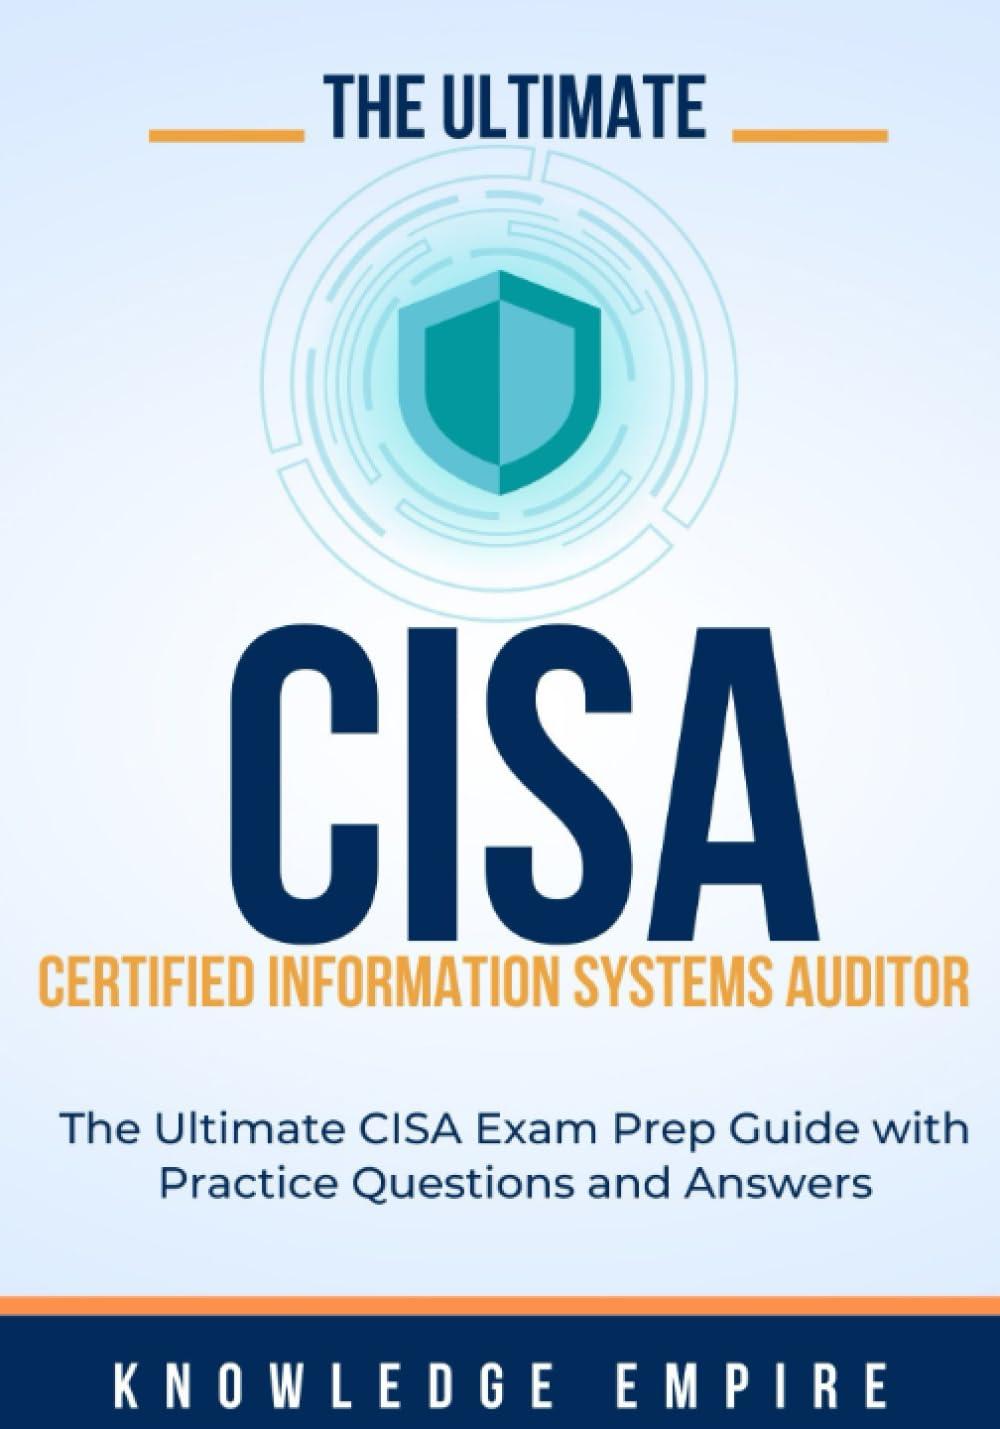 the ultimate certified information systems auditor 1st edition knowledge empire b0cj3zdhvc, 979-8860437319